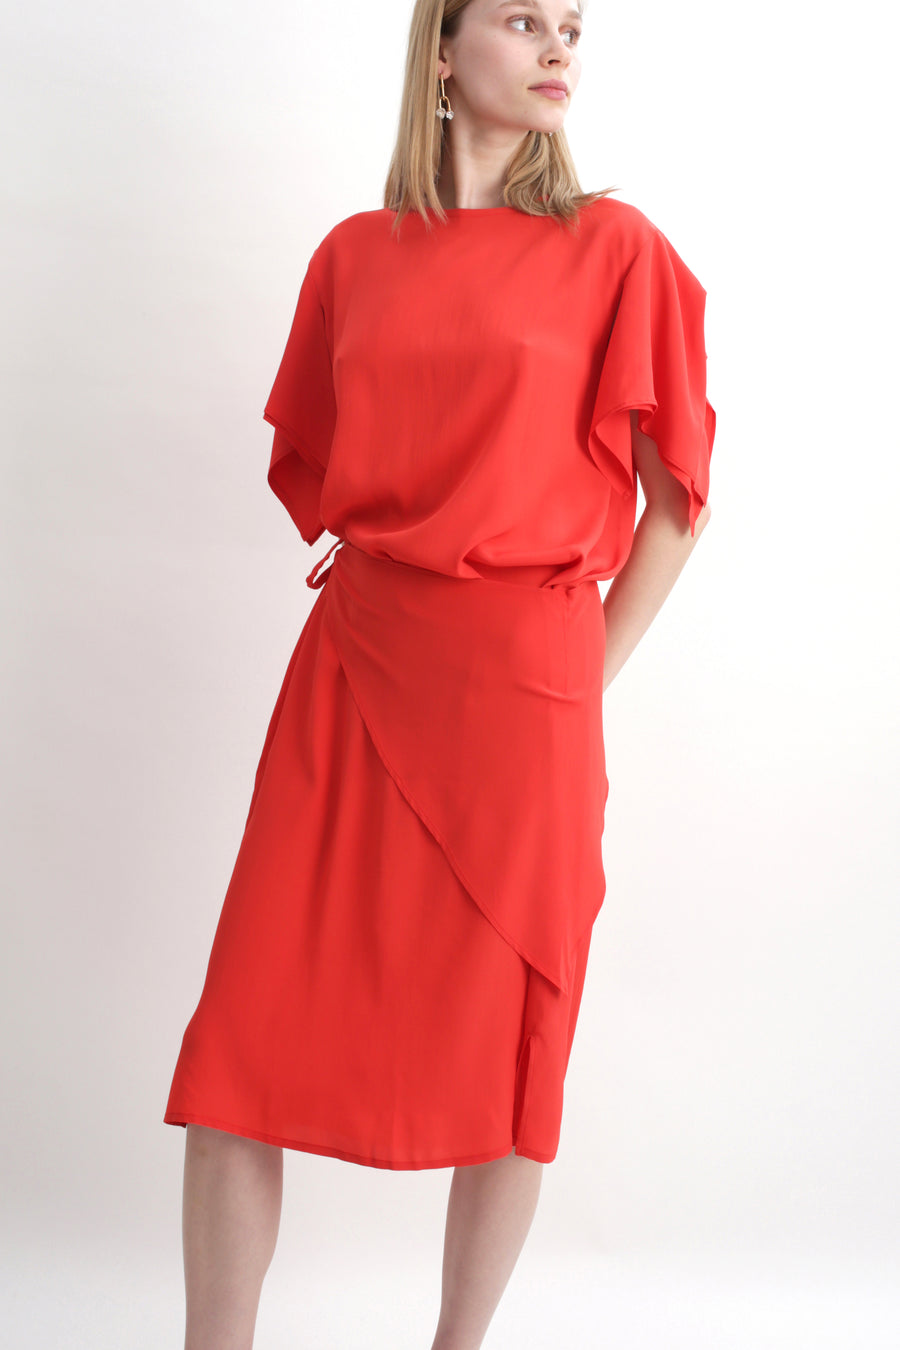 Dress Duvall, vibrant red- limited edition